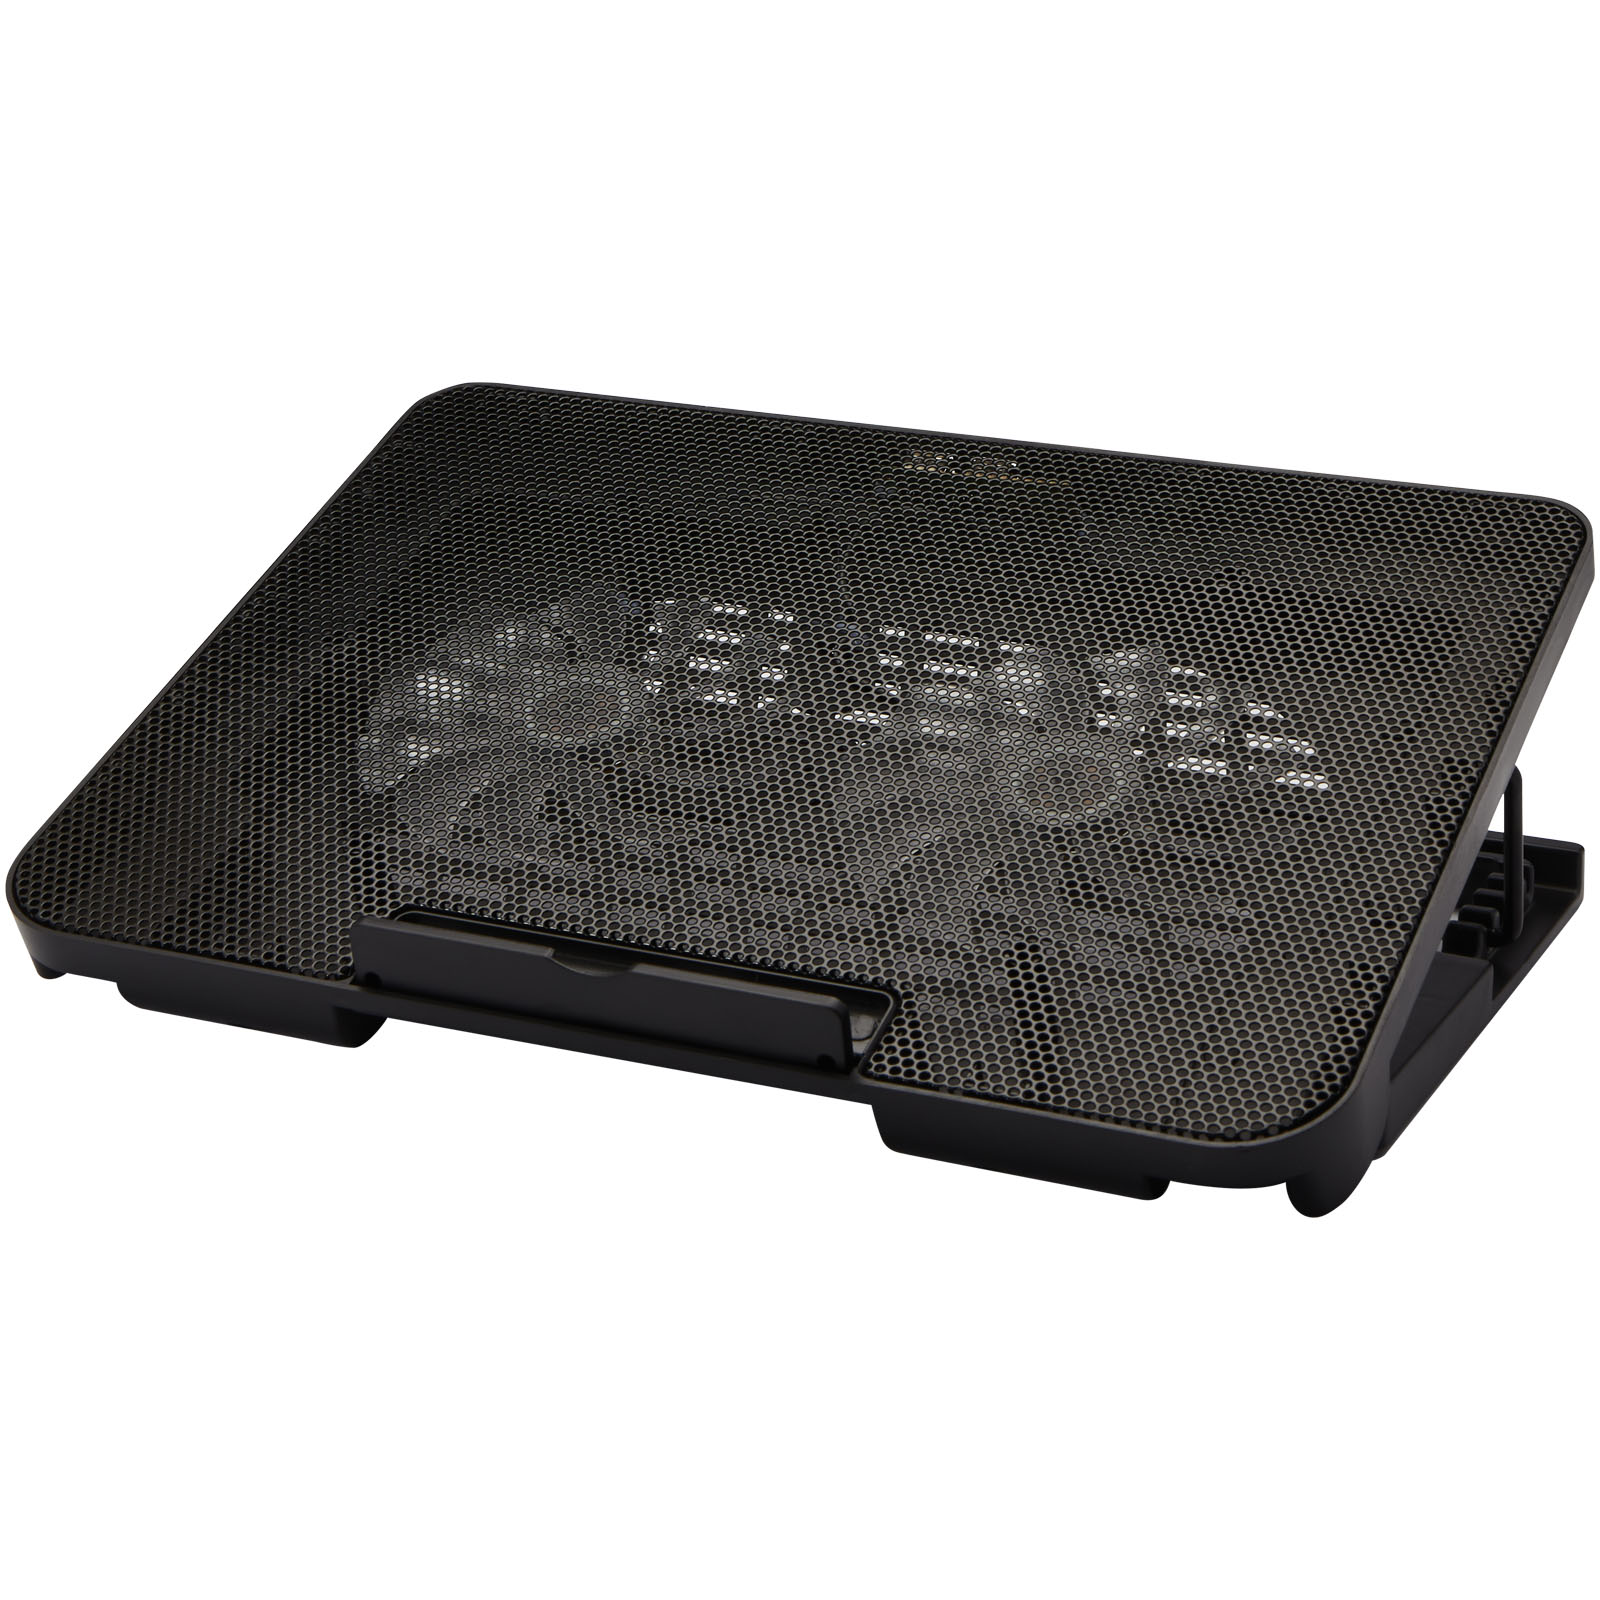 Advertising Computer Accessories - Gleam gaming laptop cooling stand